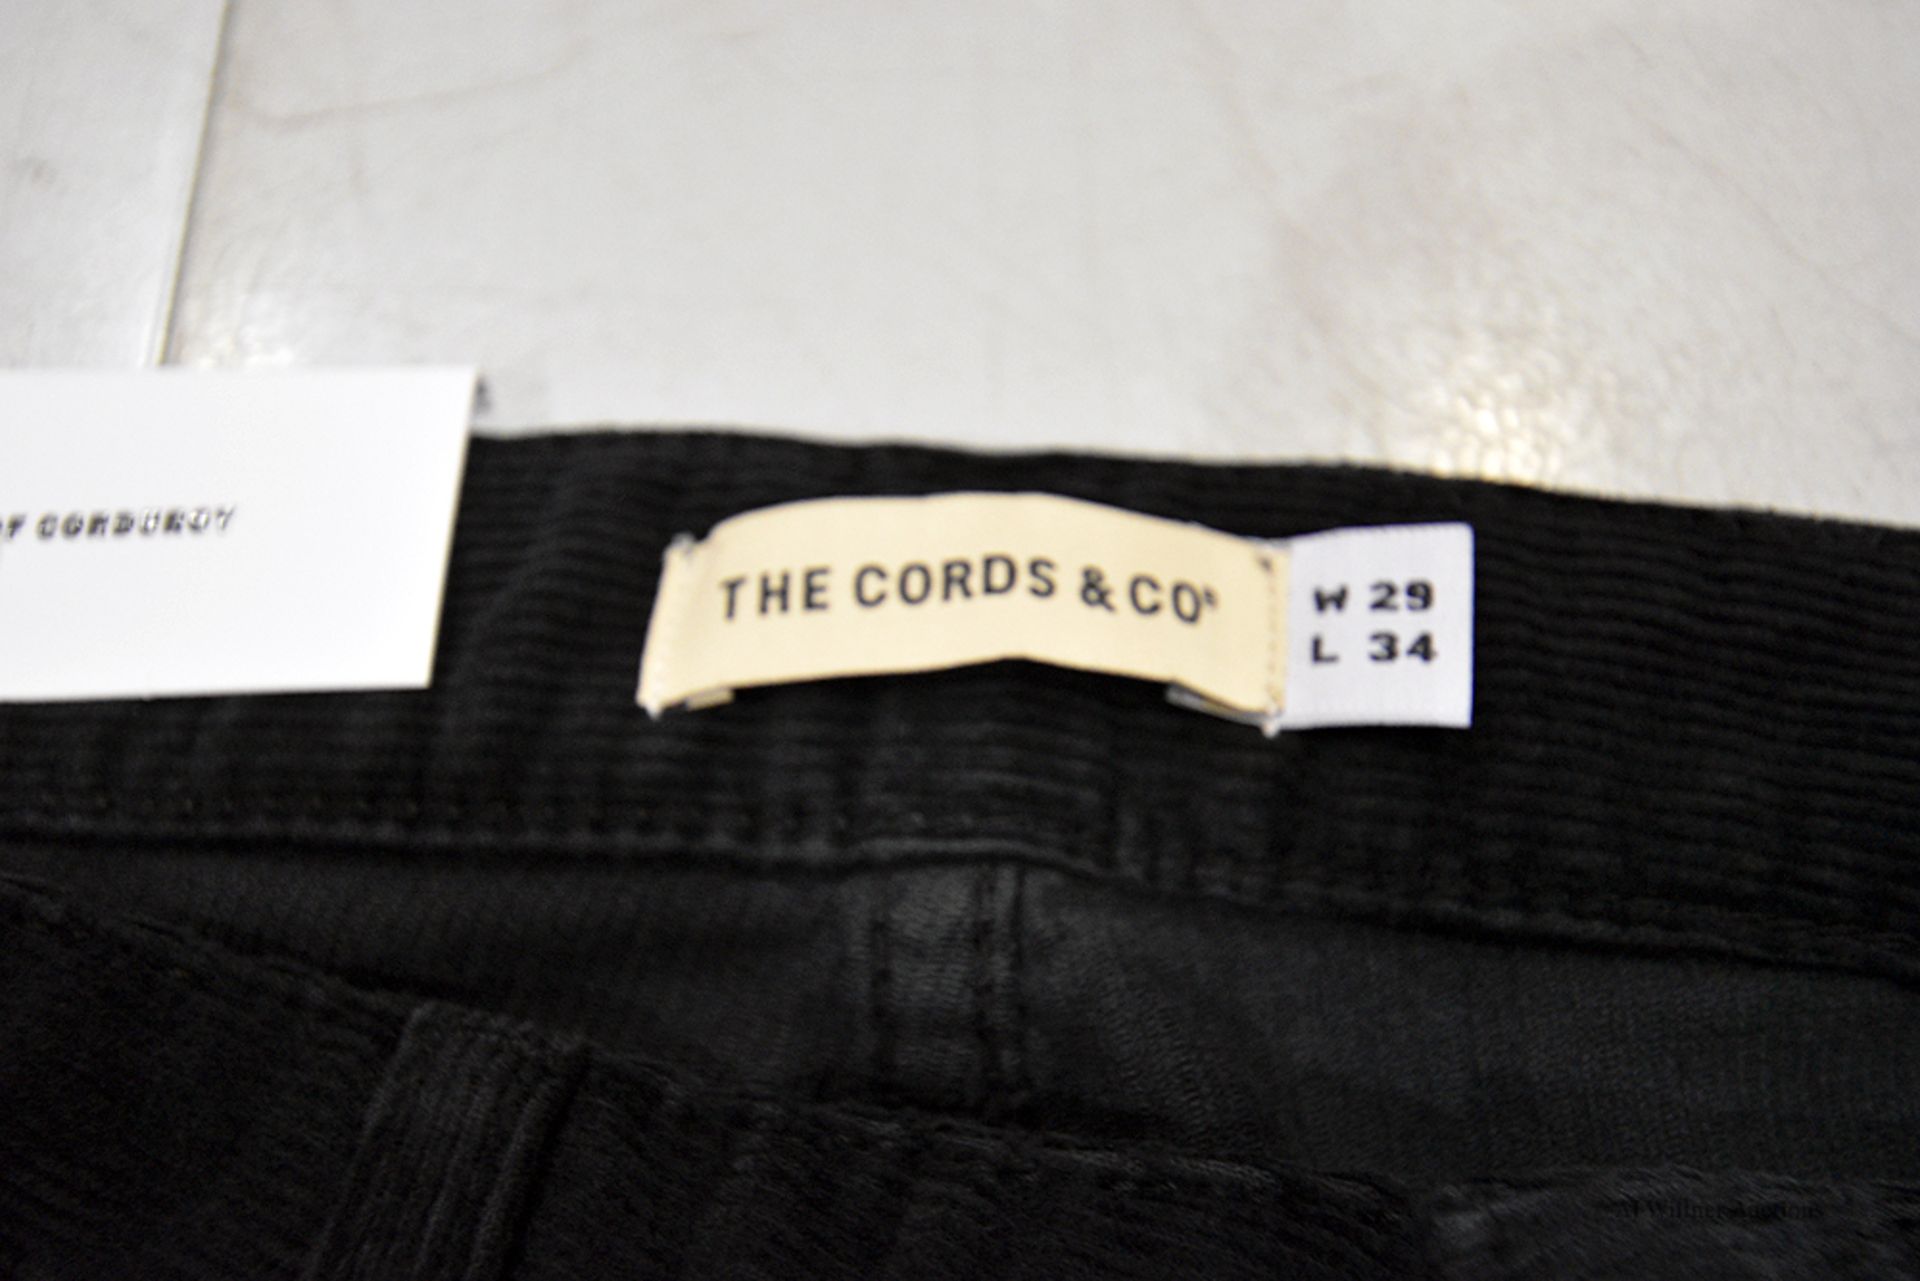 The Cords & Co. "Mom" Women's/ Mid-Waist/ Loose Fit/ Chopped Pants MSRP $160 - Image 5 of 5